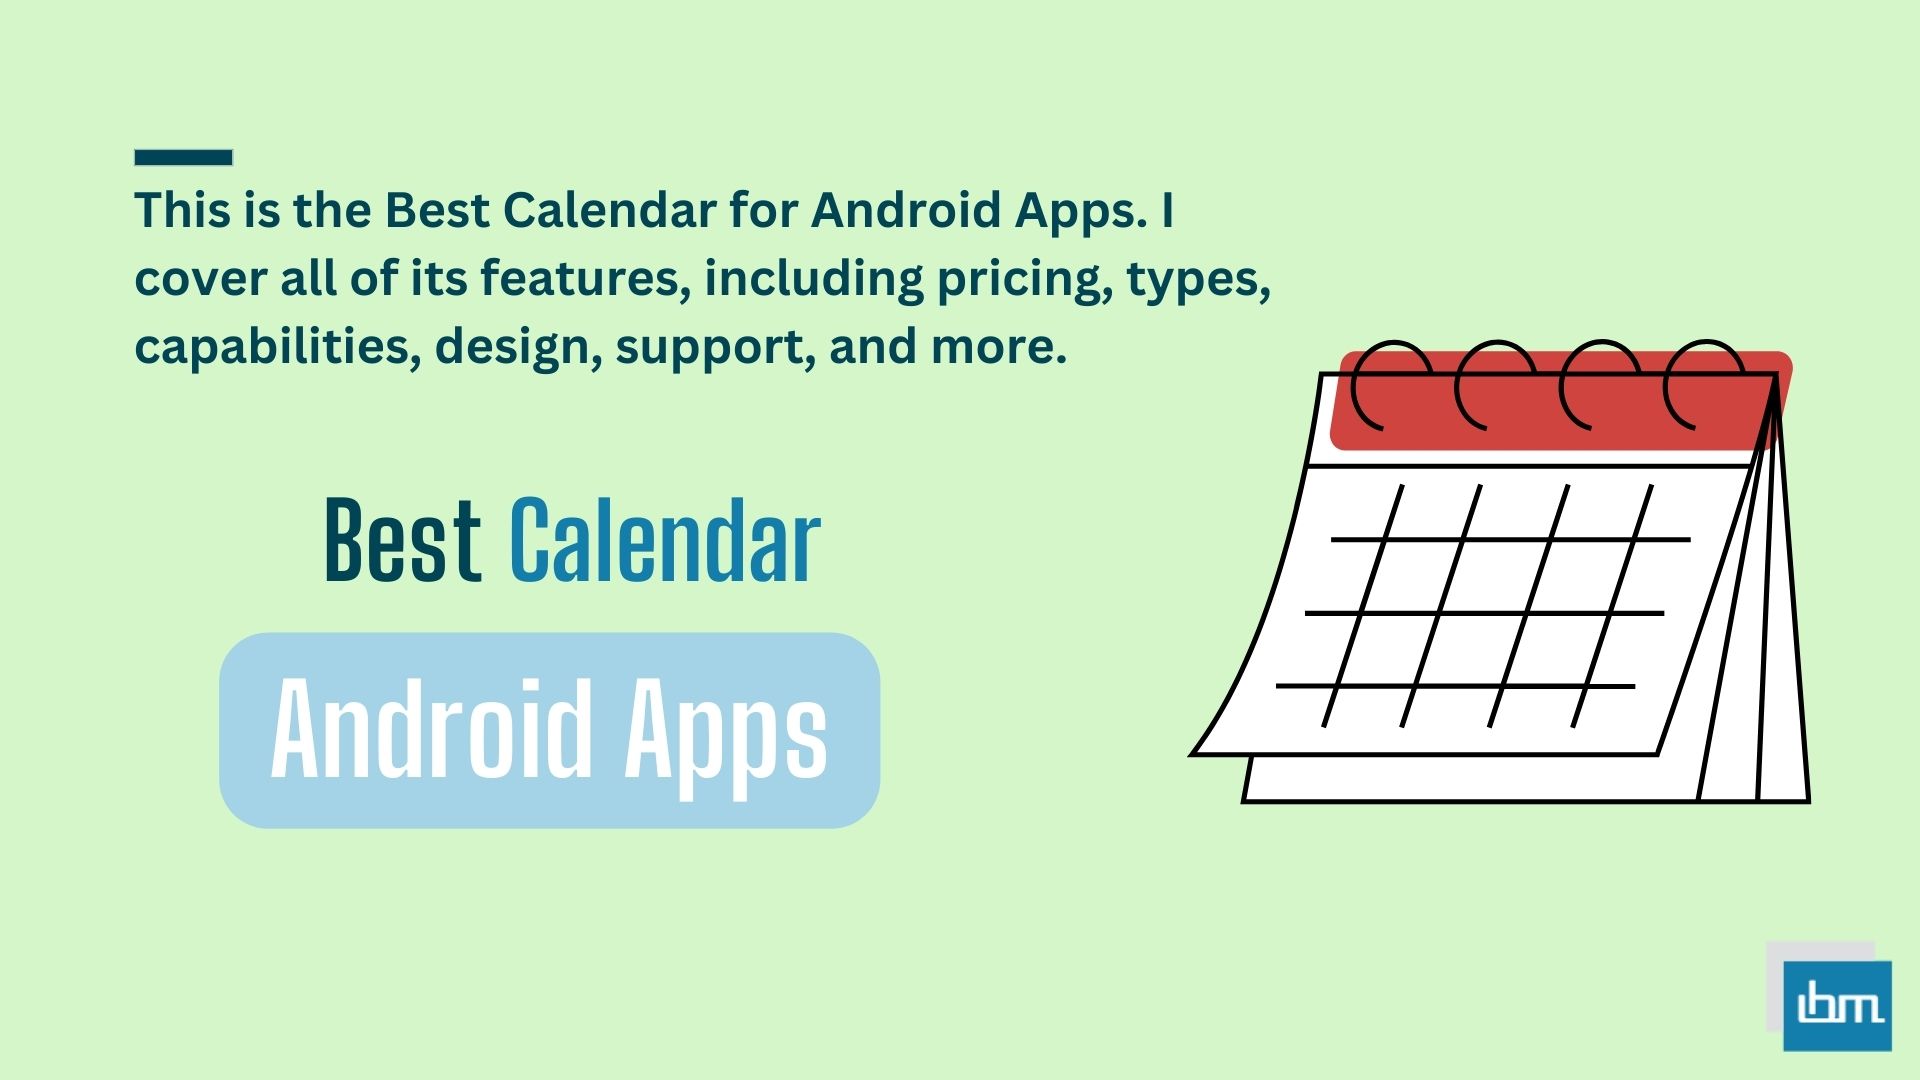 Best Calendar for Android Apps